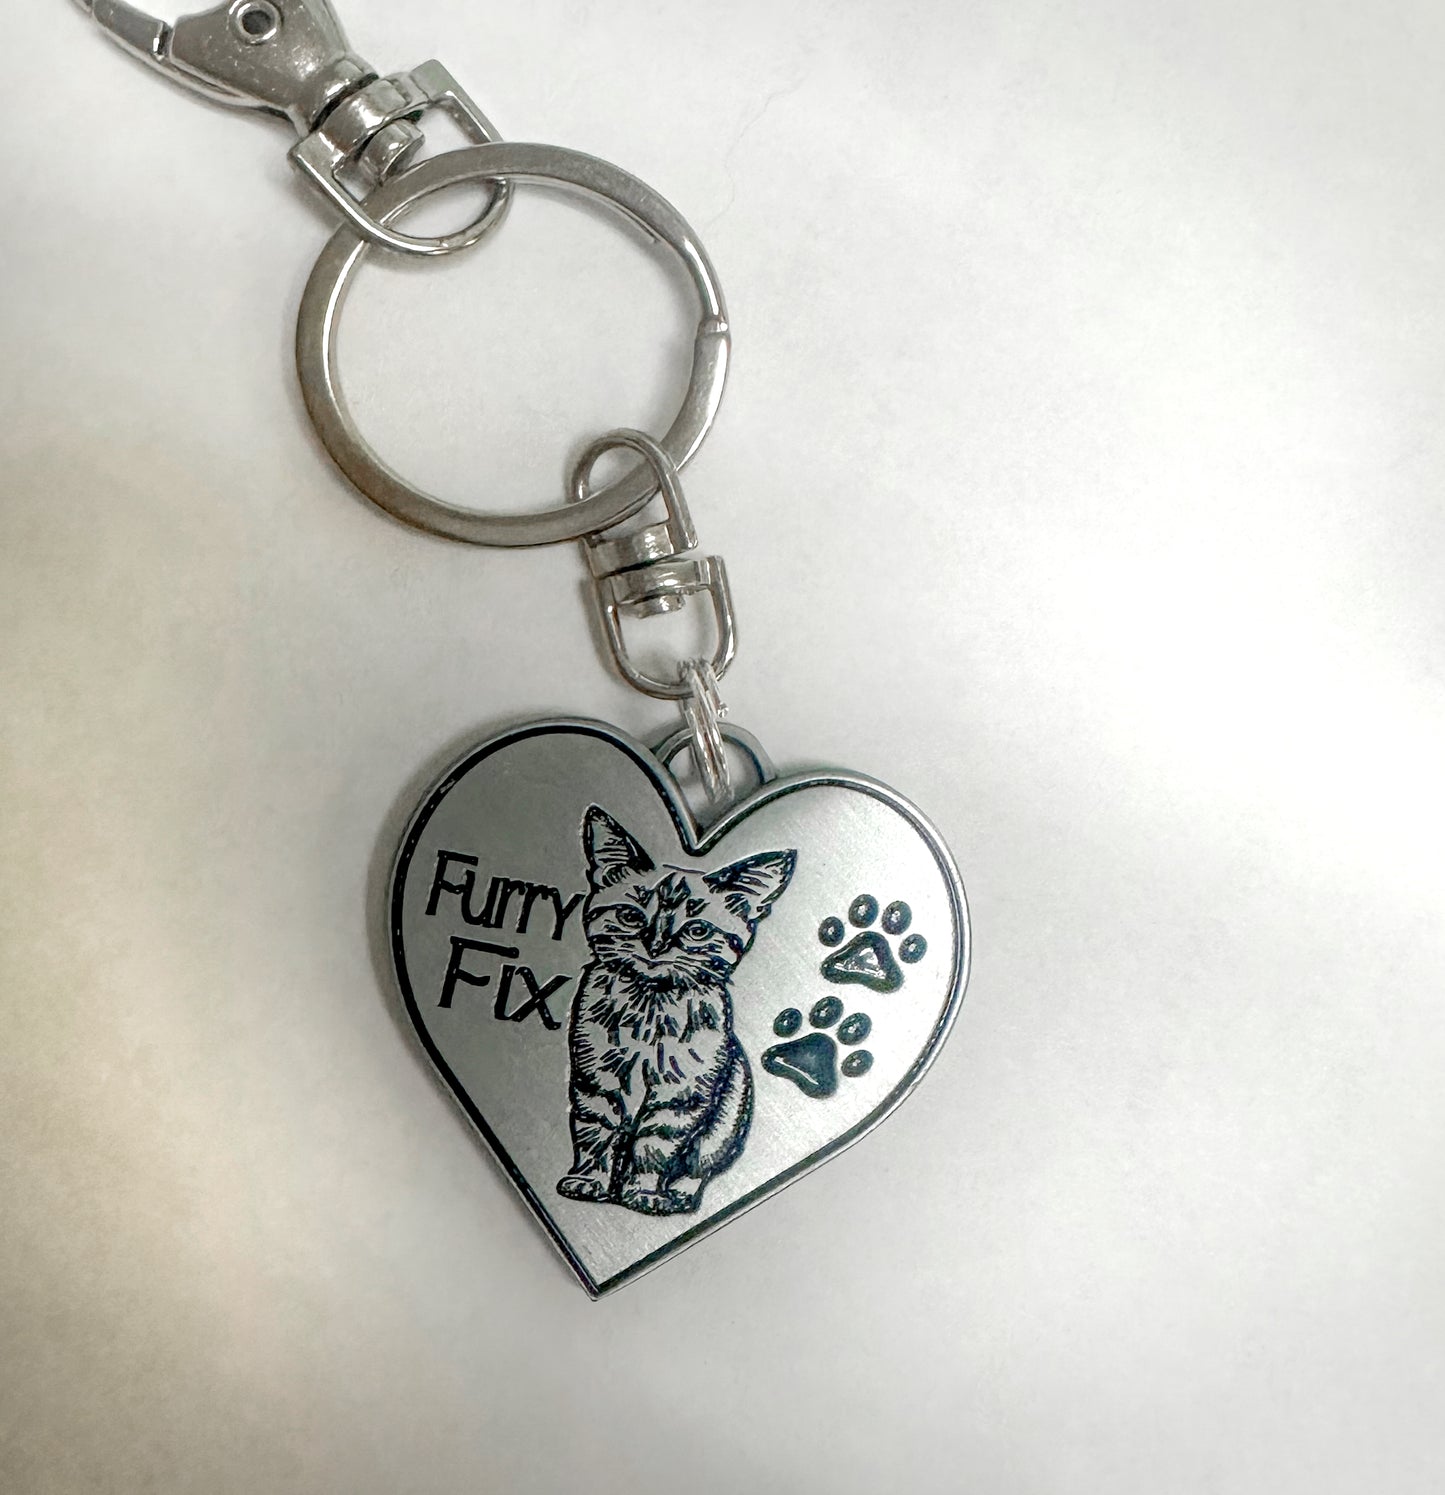 Fix one - save thousands - Furry Fix - metal - keychain, zipper pull or any use.  Very unique - custom designed.